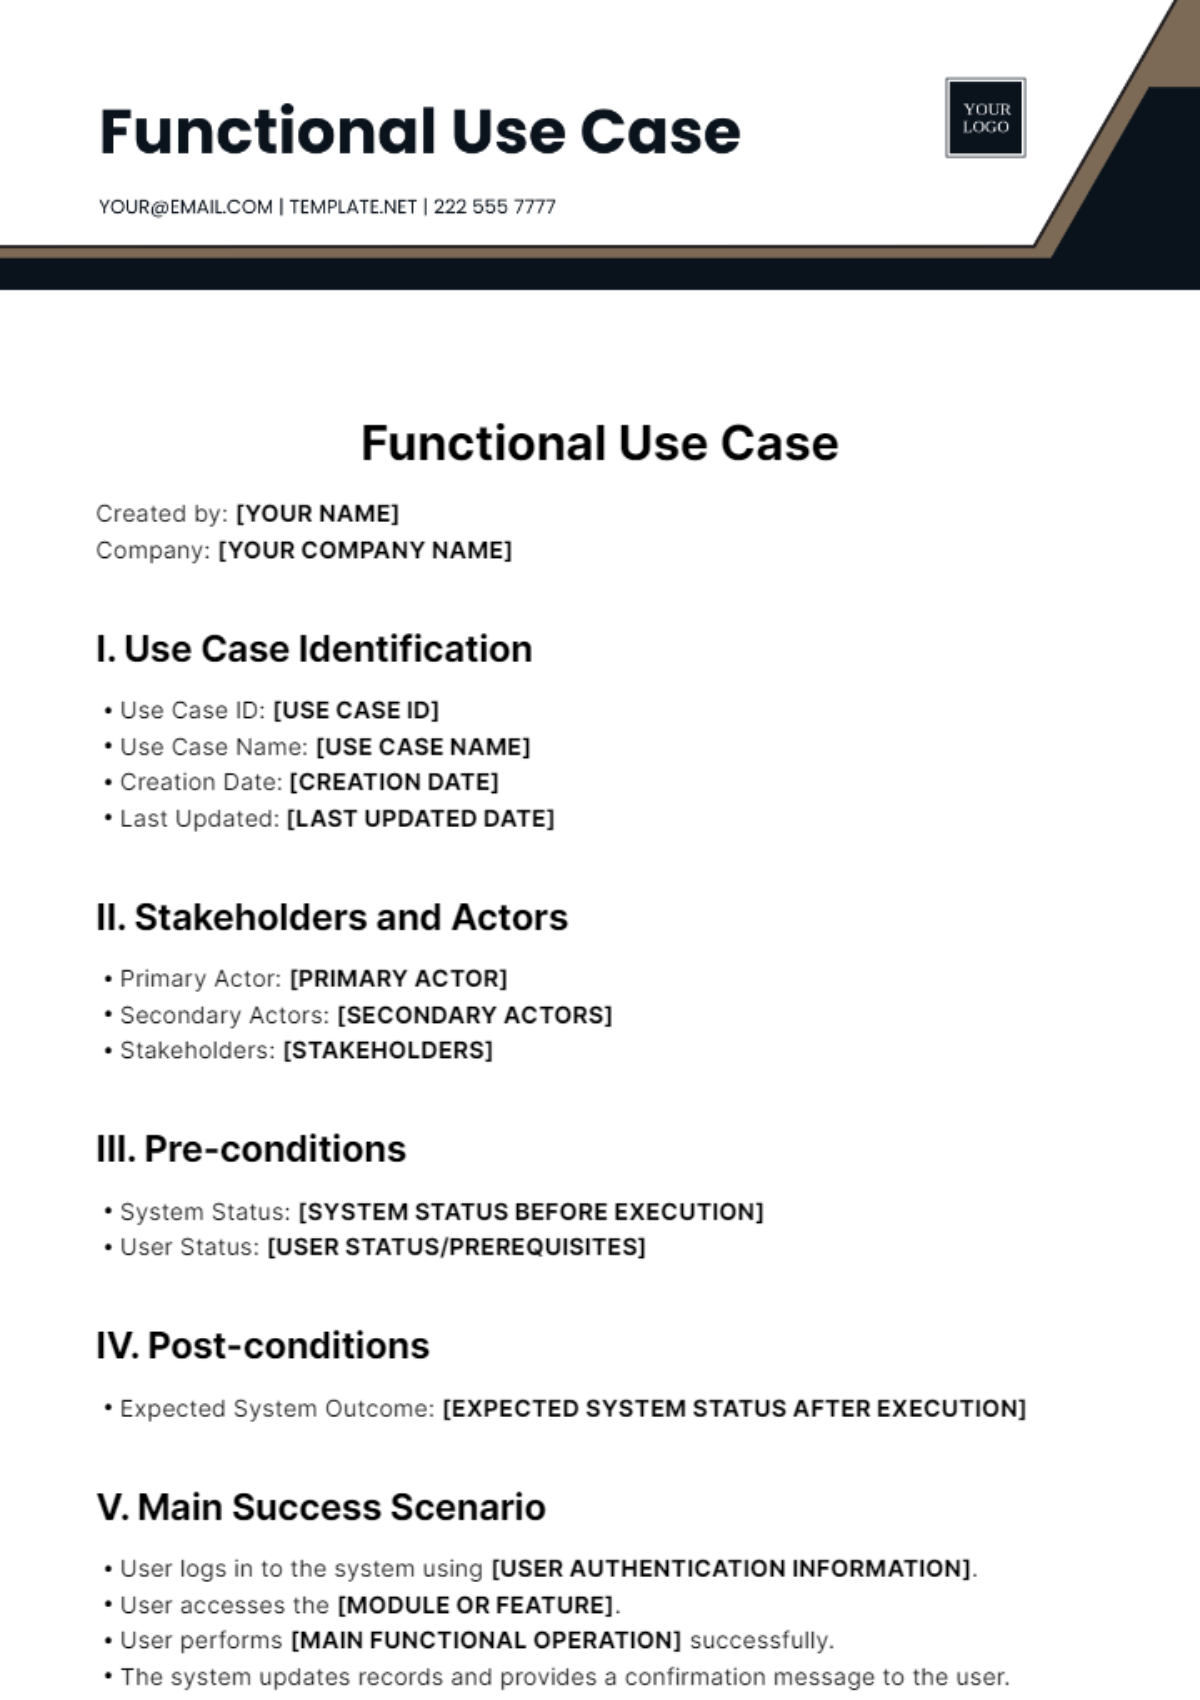 Functional Use Case Template